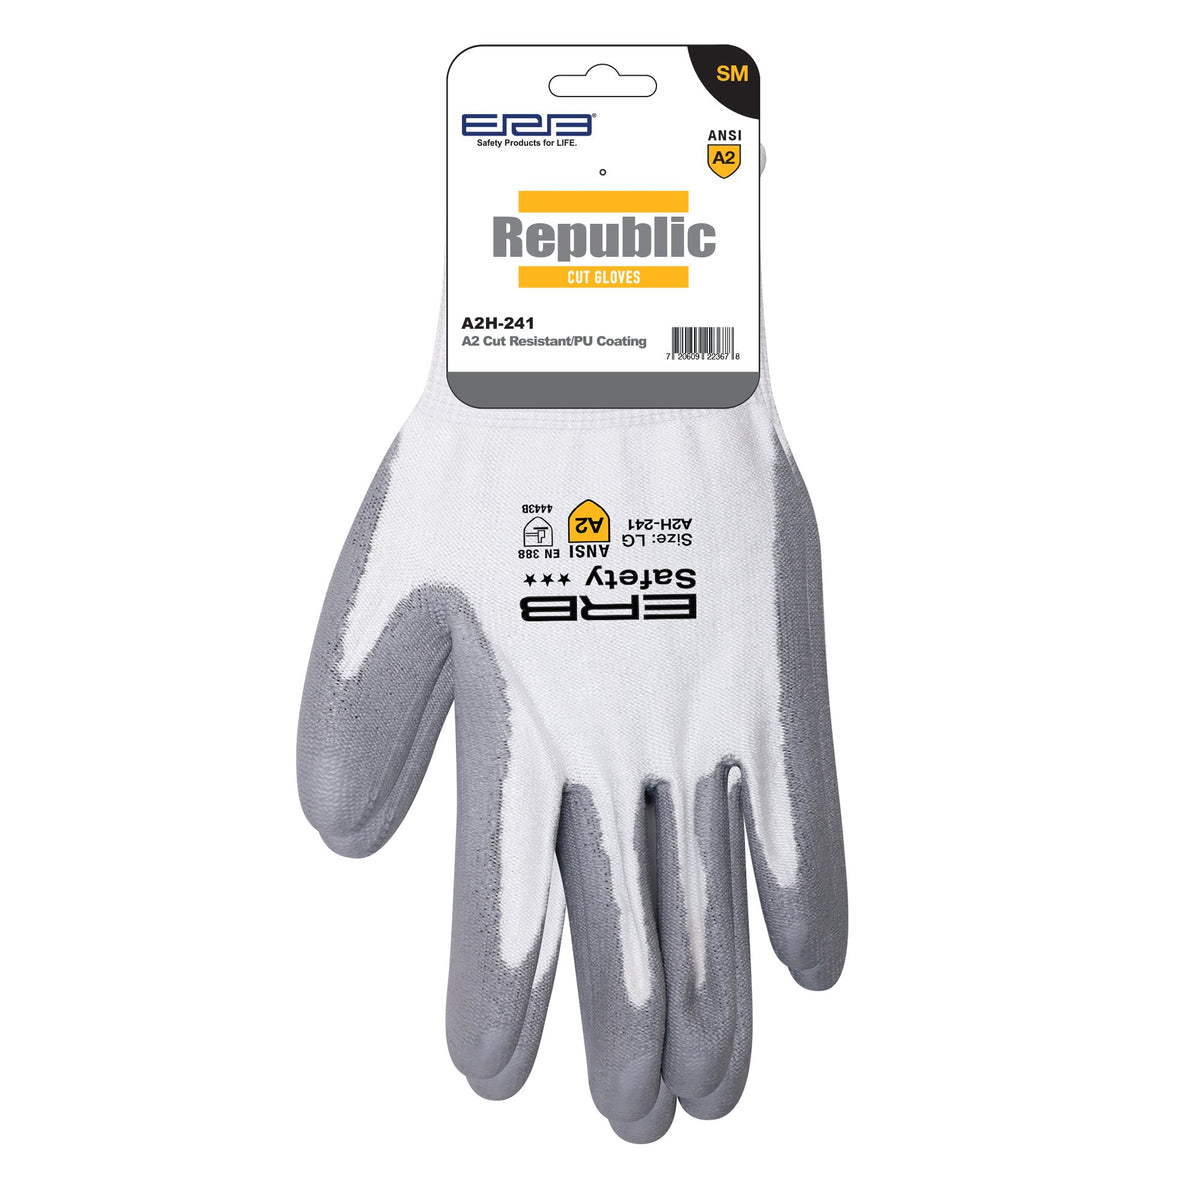 A2H-241 HPPE Cut Glove with PU Coating 12pair